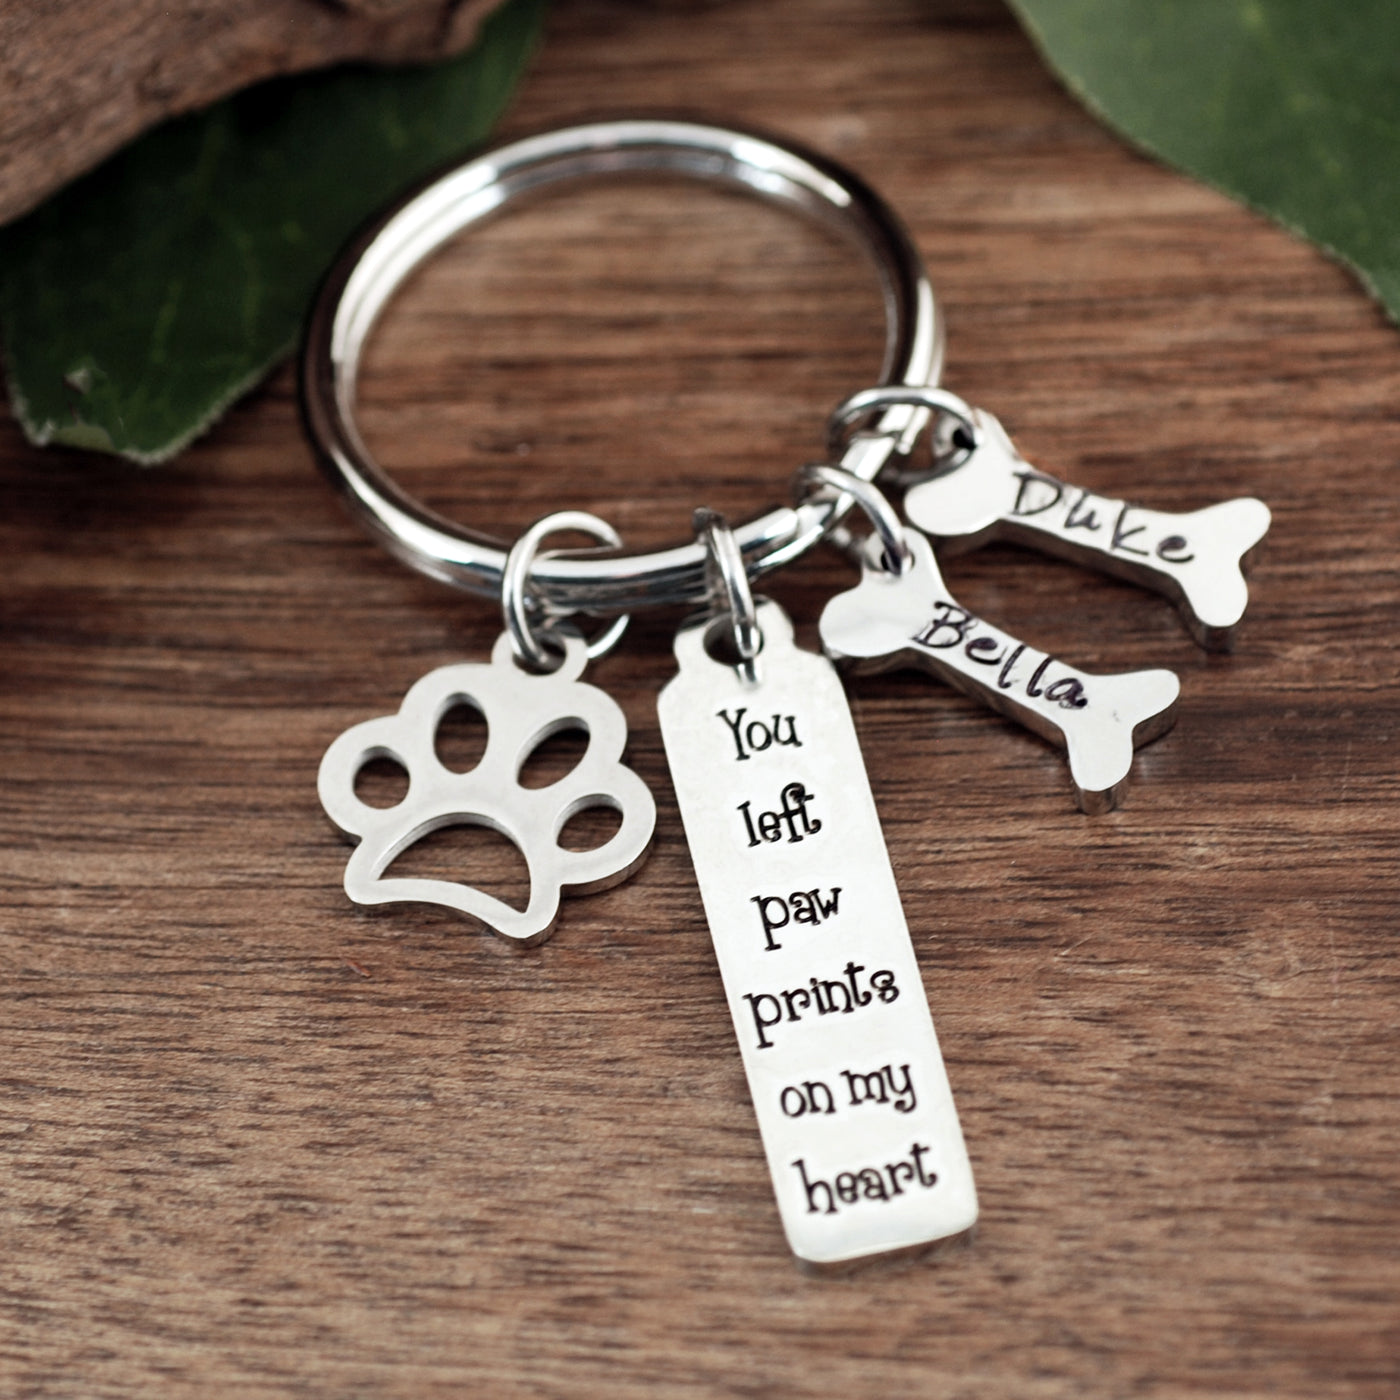 Personalized Pet Memorial Keychain with Dog Bones